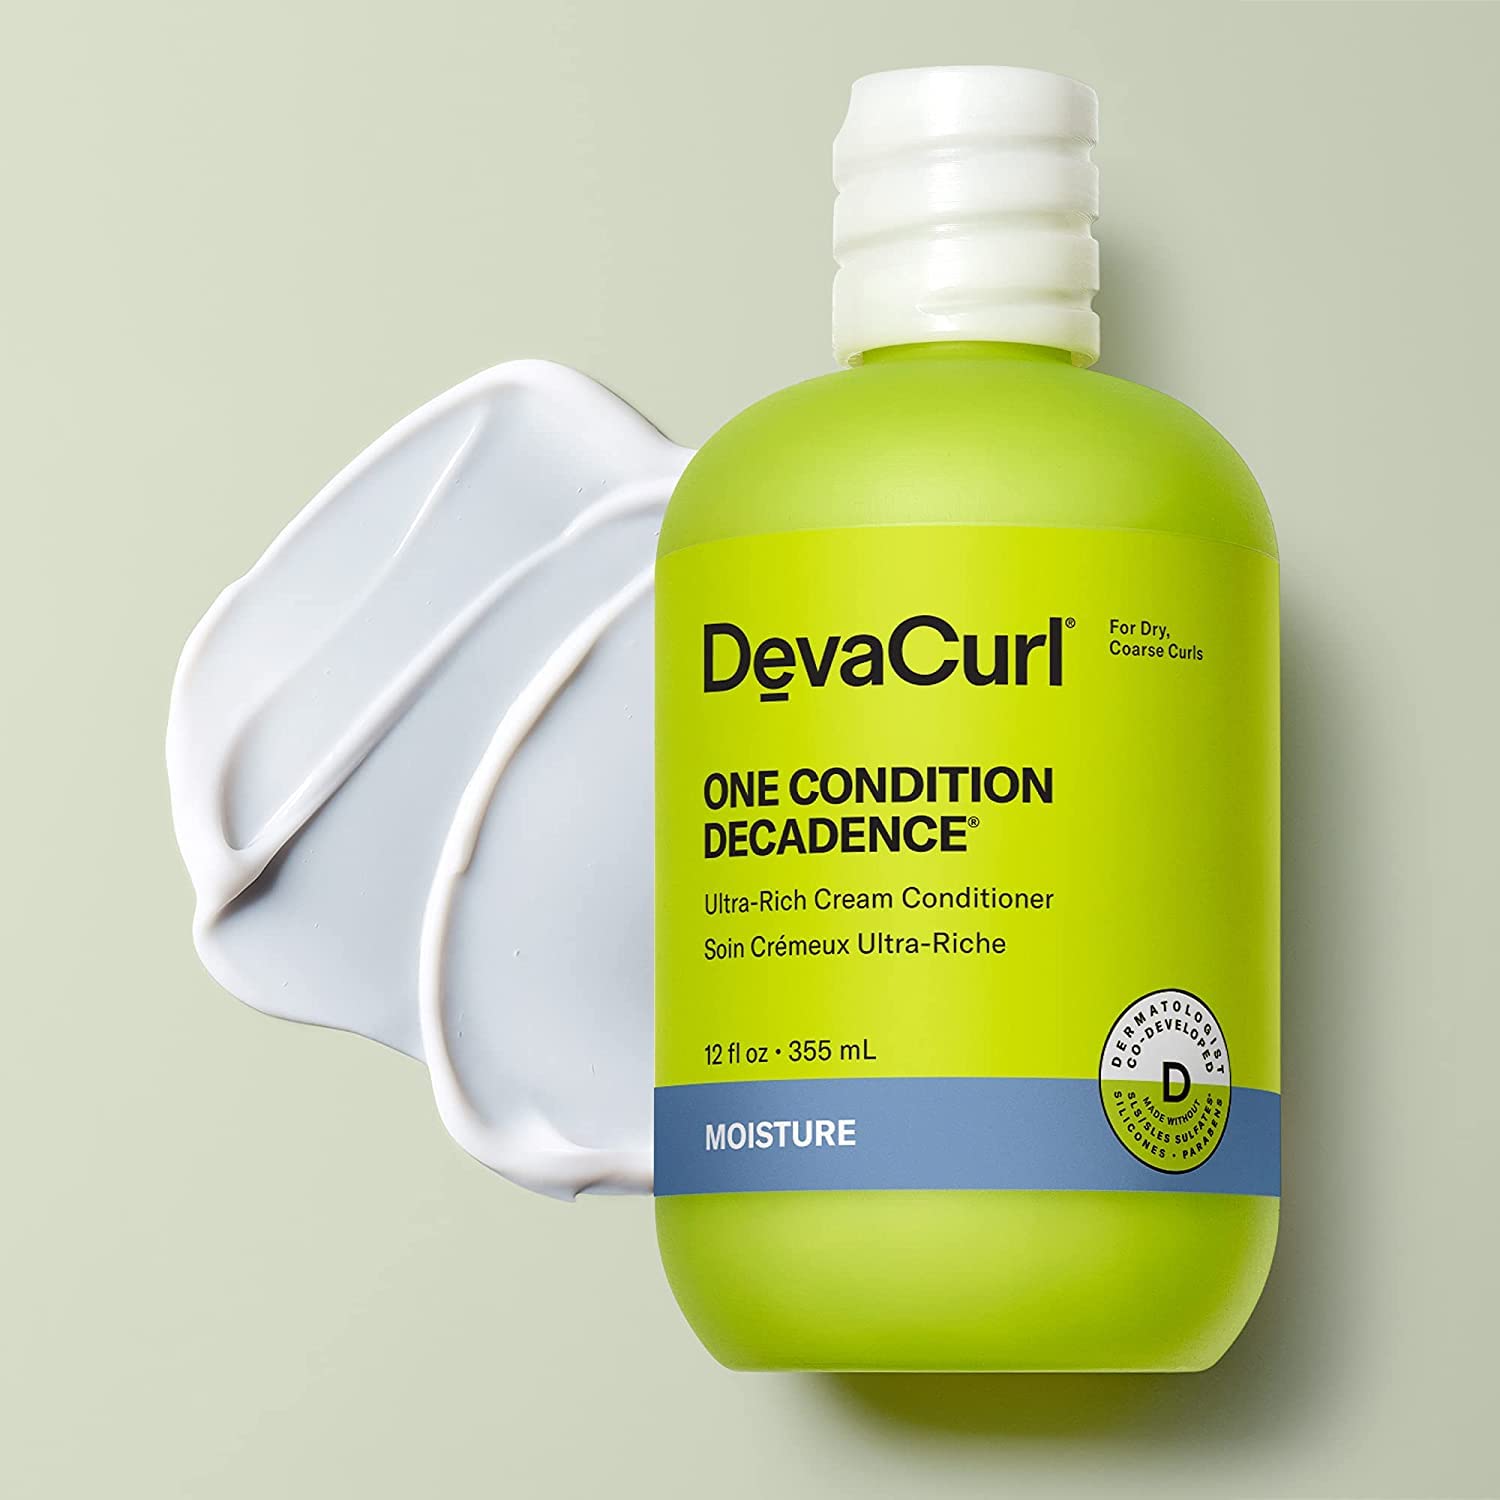 DevaCurl One Condition Decadence Ultra-Rich Cream Conditioner | Fights Tangles | Controls Frizz | Maintains Shine